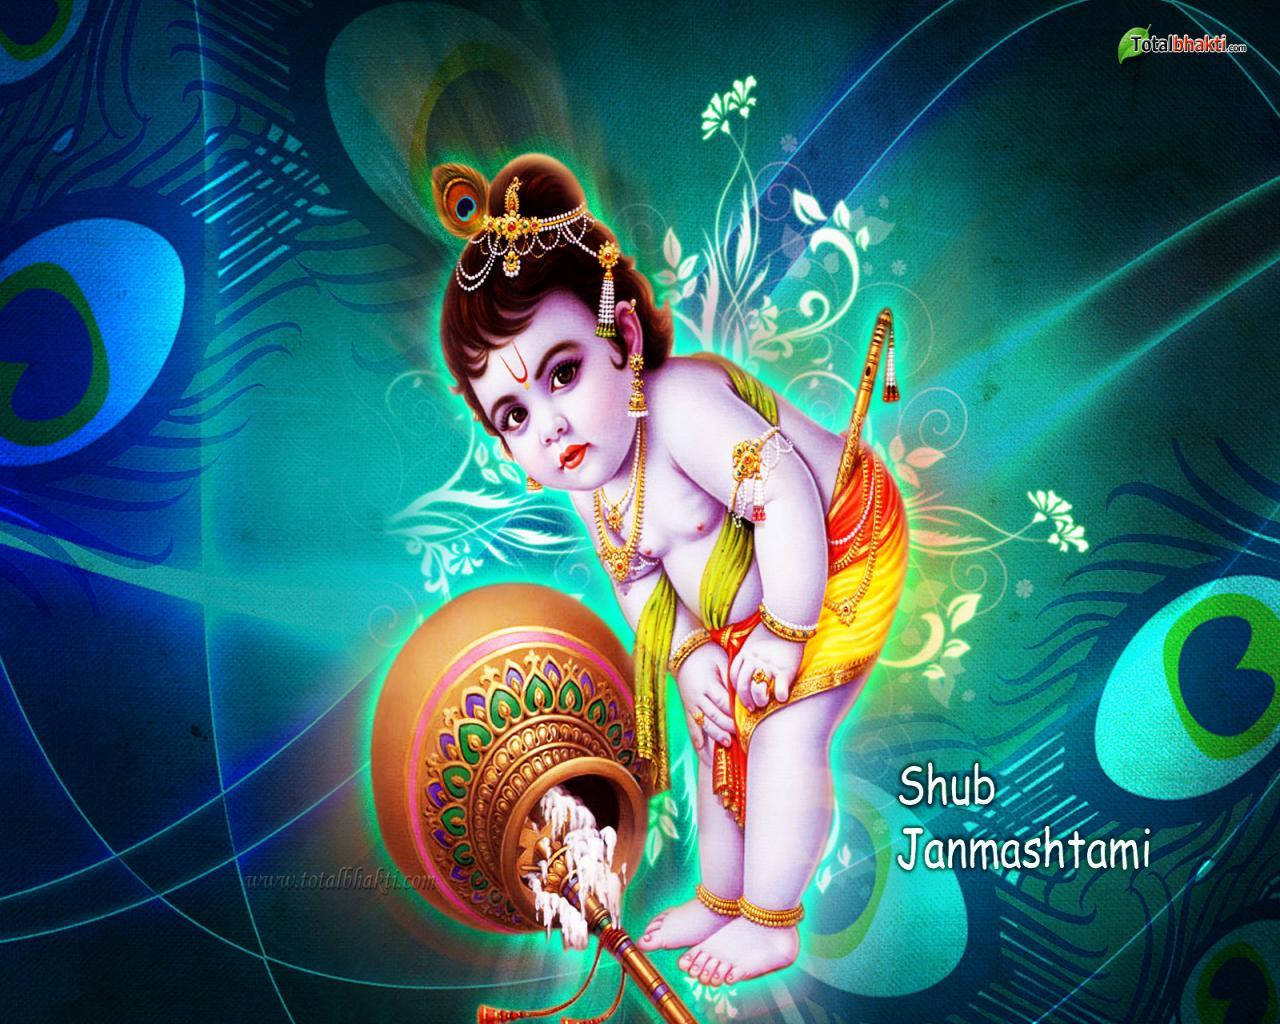 200+] Krishna Hd Wallpapers for FREE | Wallpapers.com